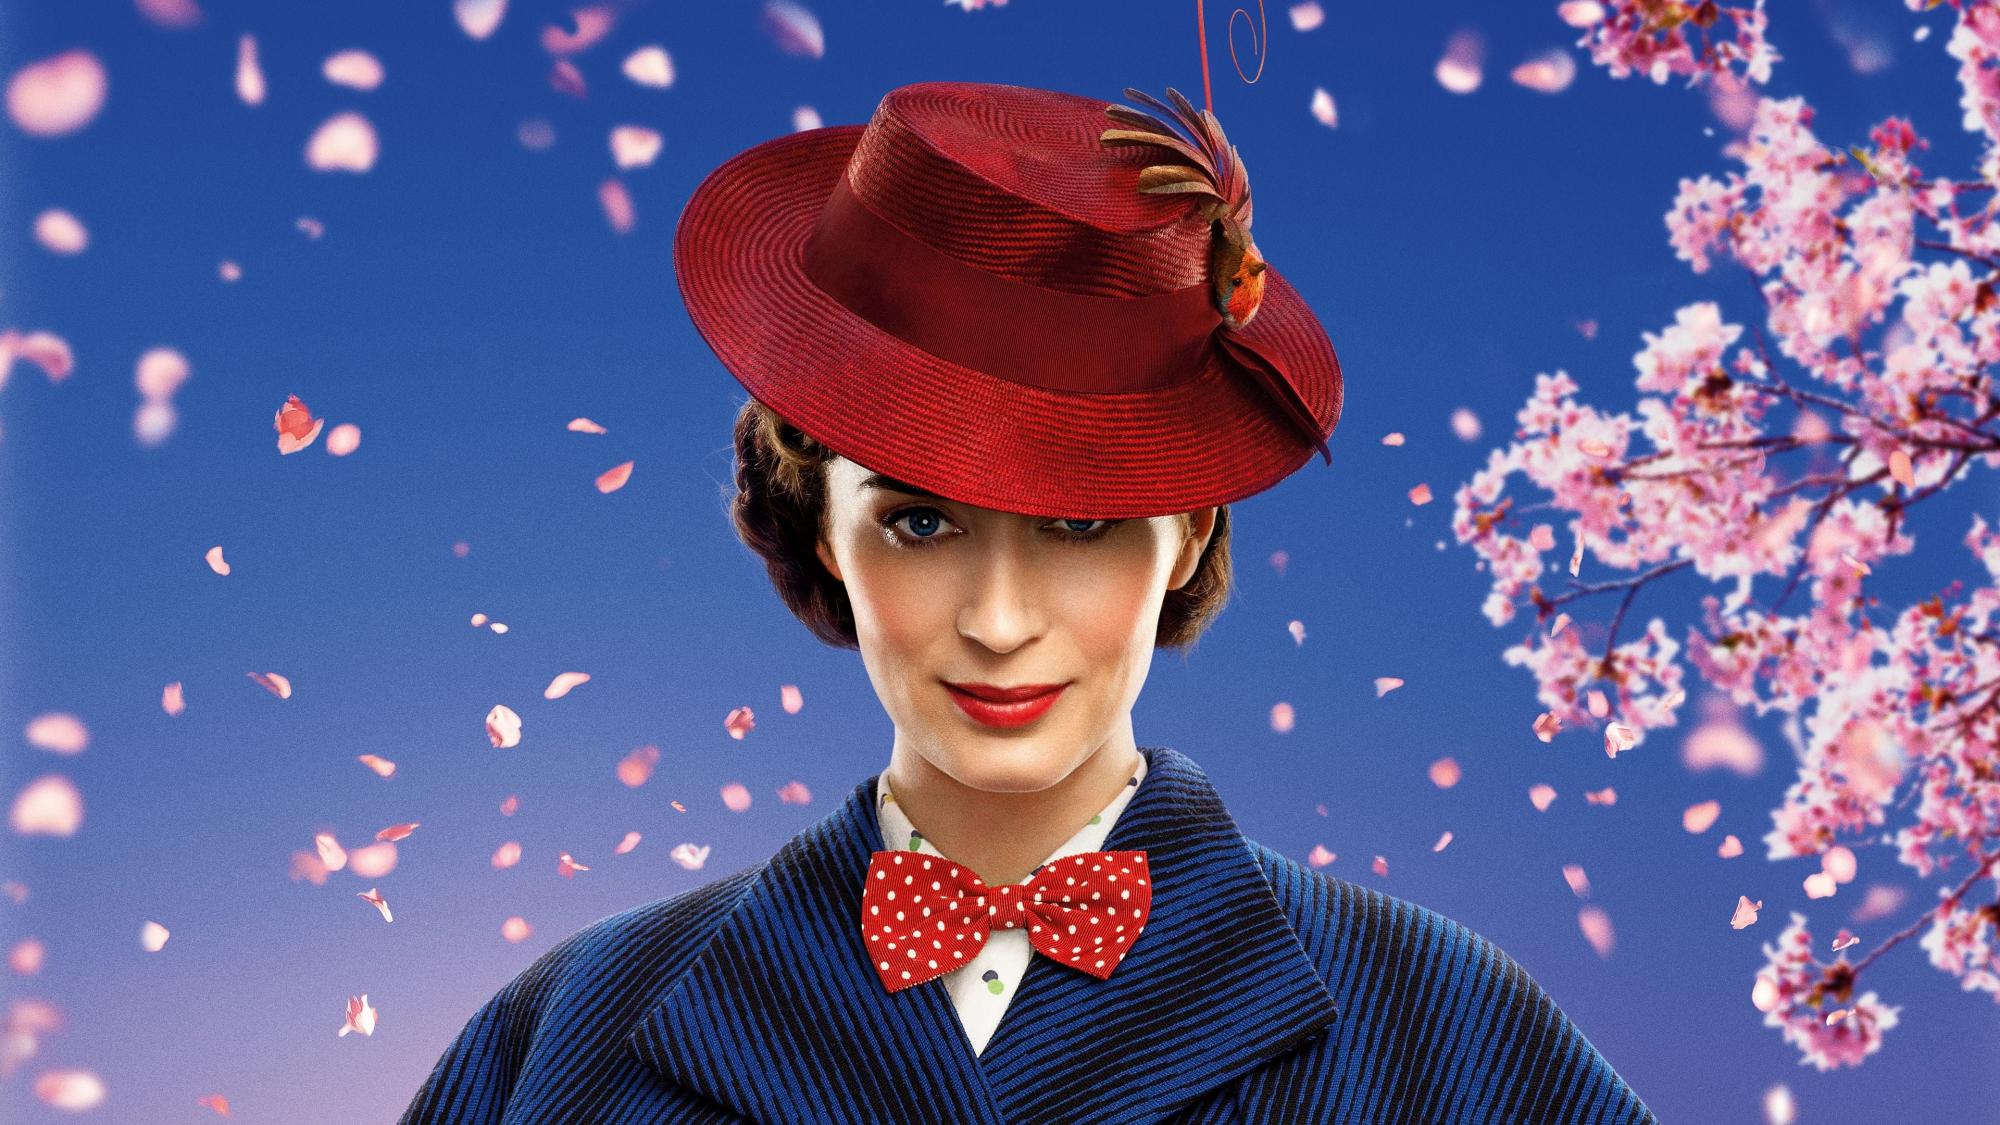 Backdrop Image for Mary Poppins Returns